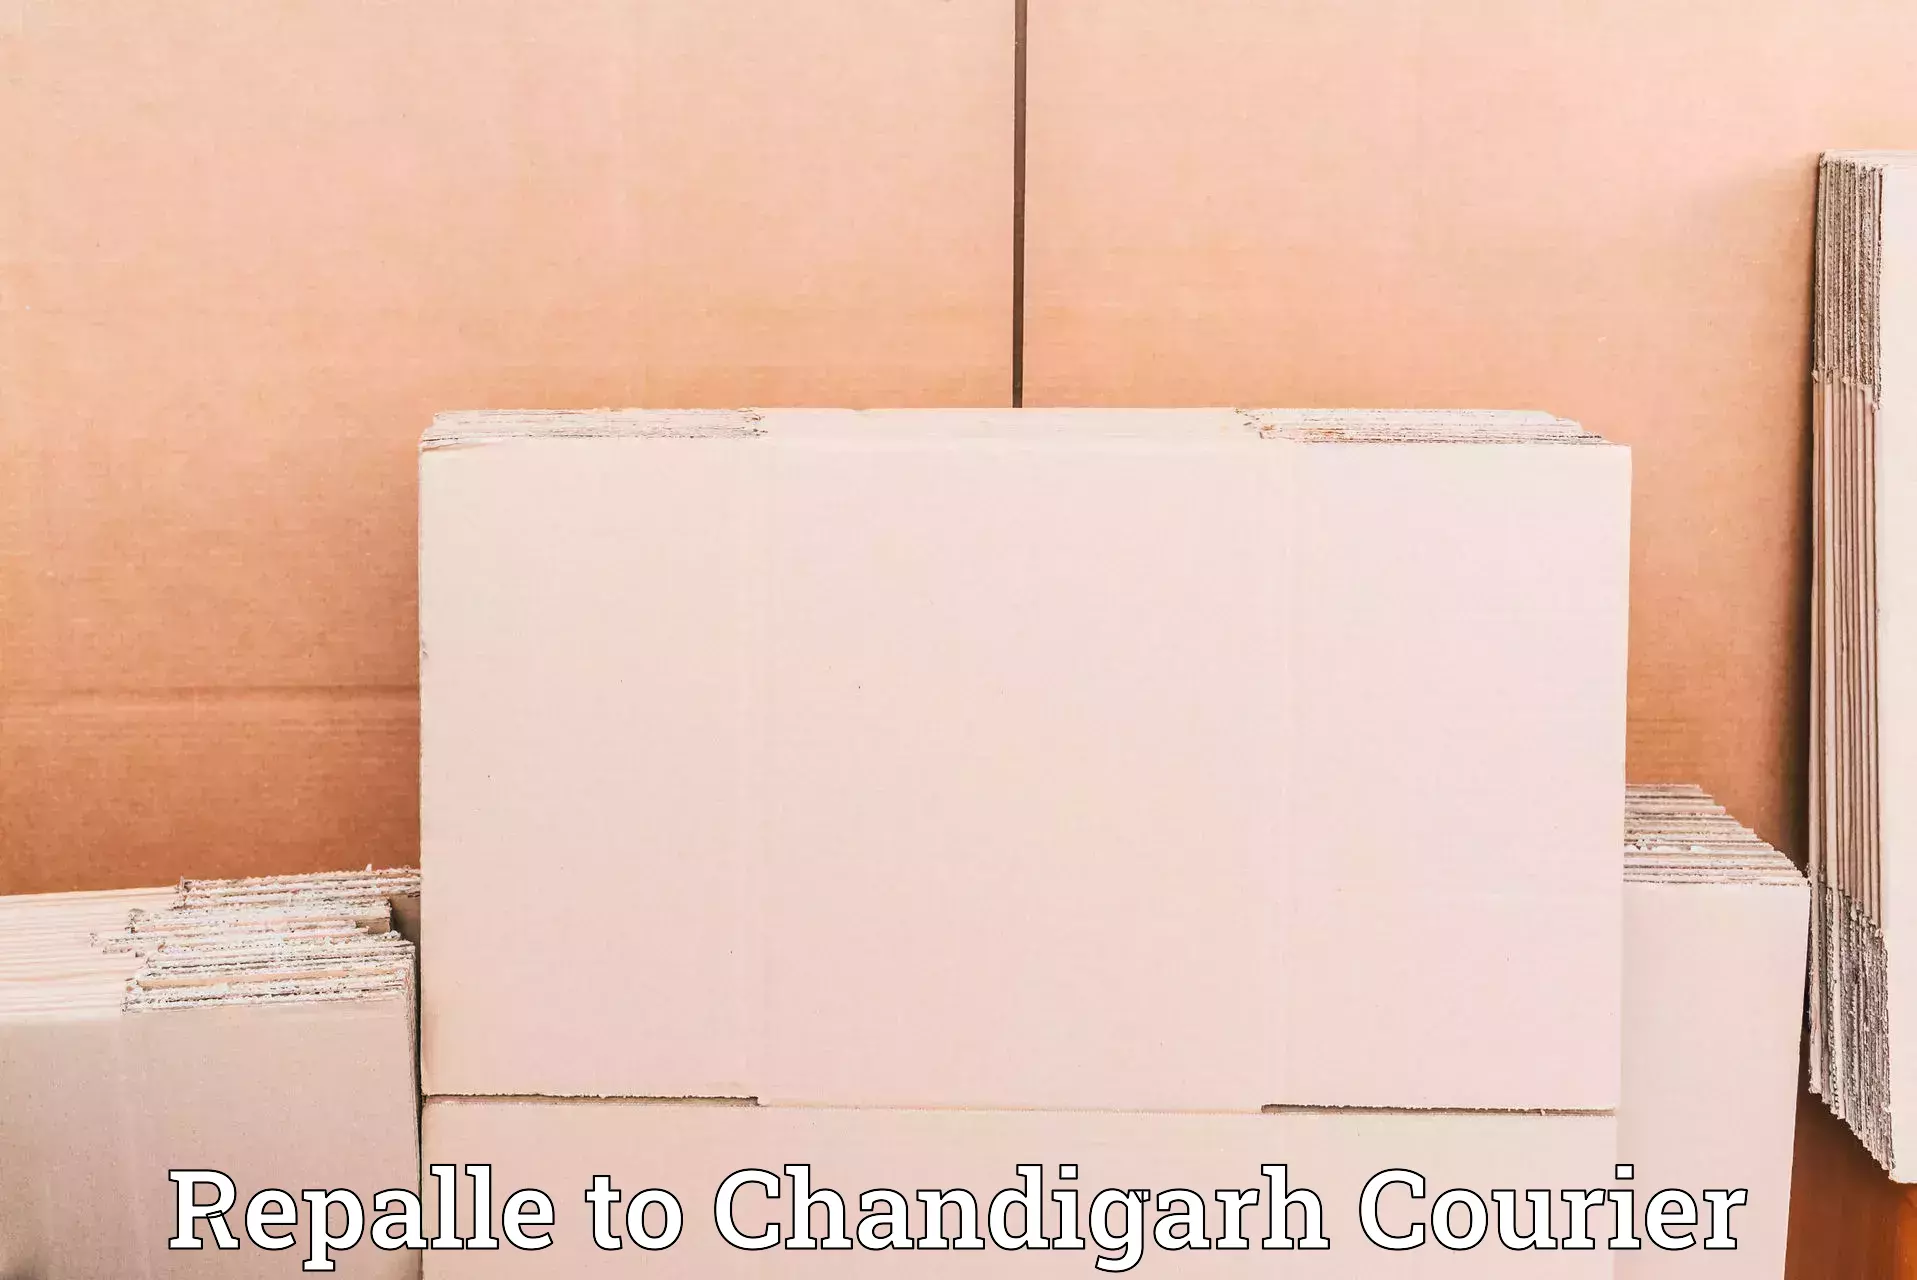 Smart logistics solutions Repalle to Chandigarh